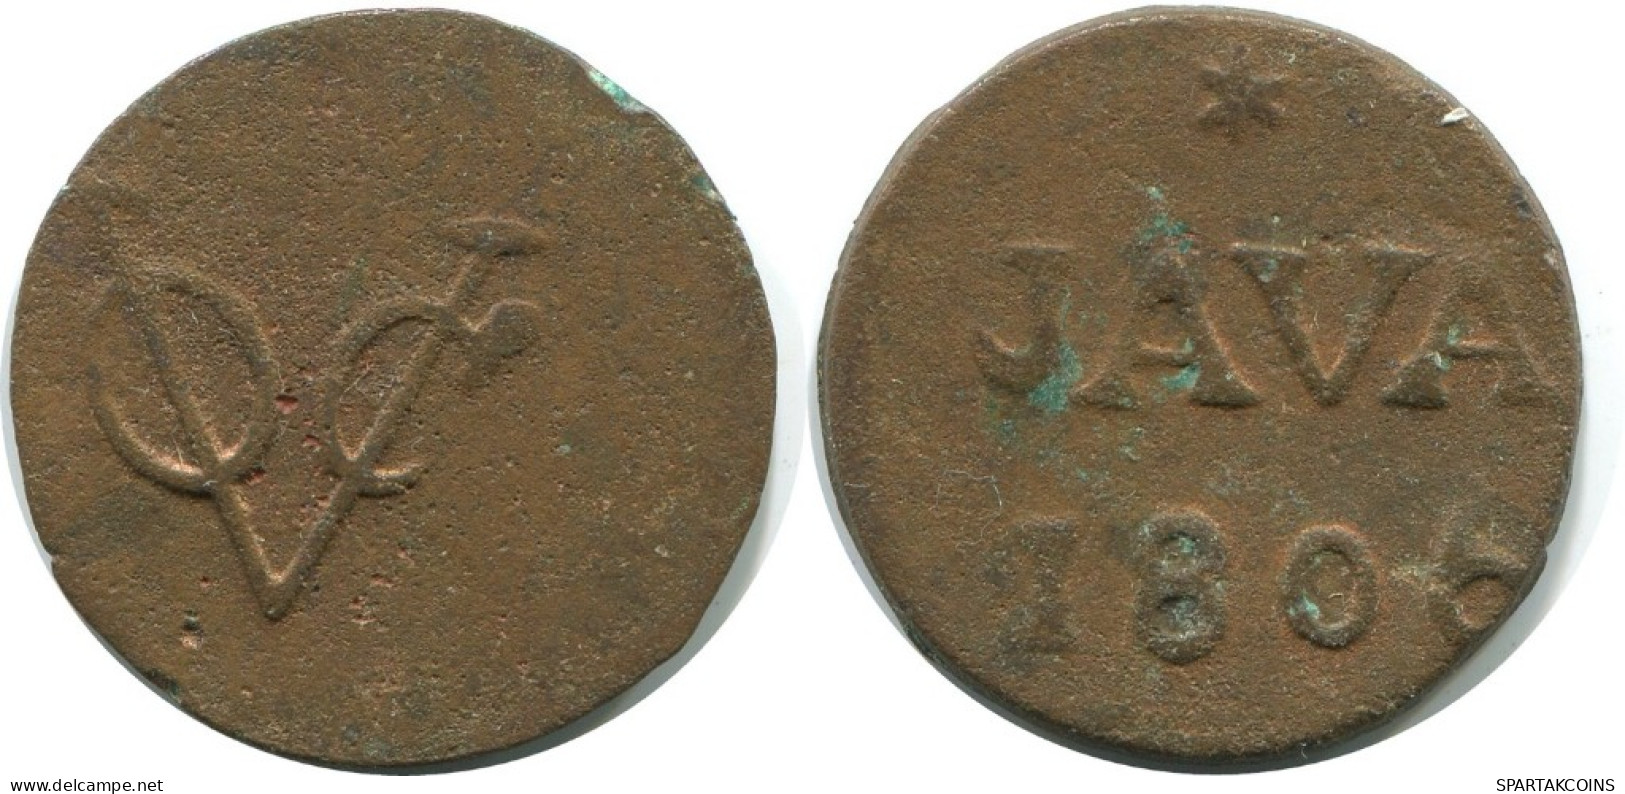 1806 JAVA VOC DUIT NETHERLANDS EAST INDIA R NEW YORK COLONIAL PENNY #AE837.27.U.A - Dutch East Indies